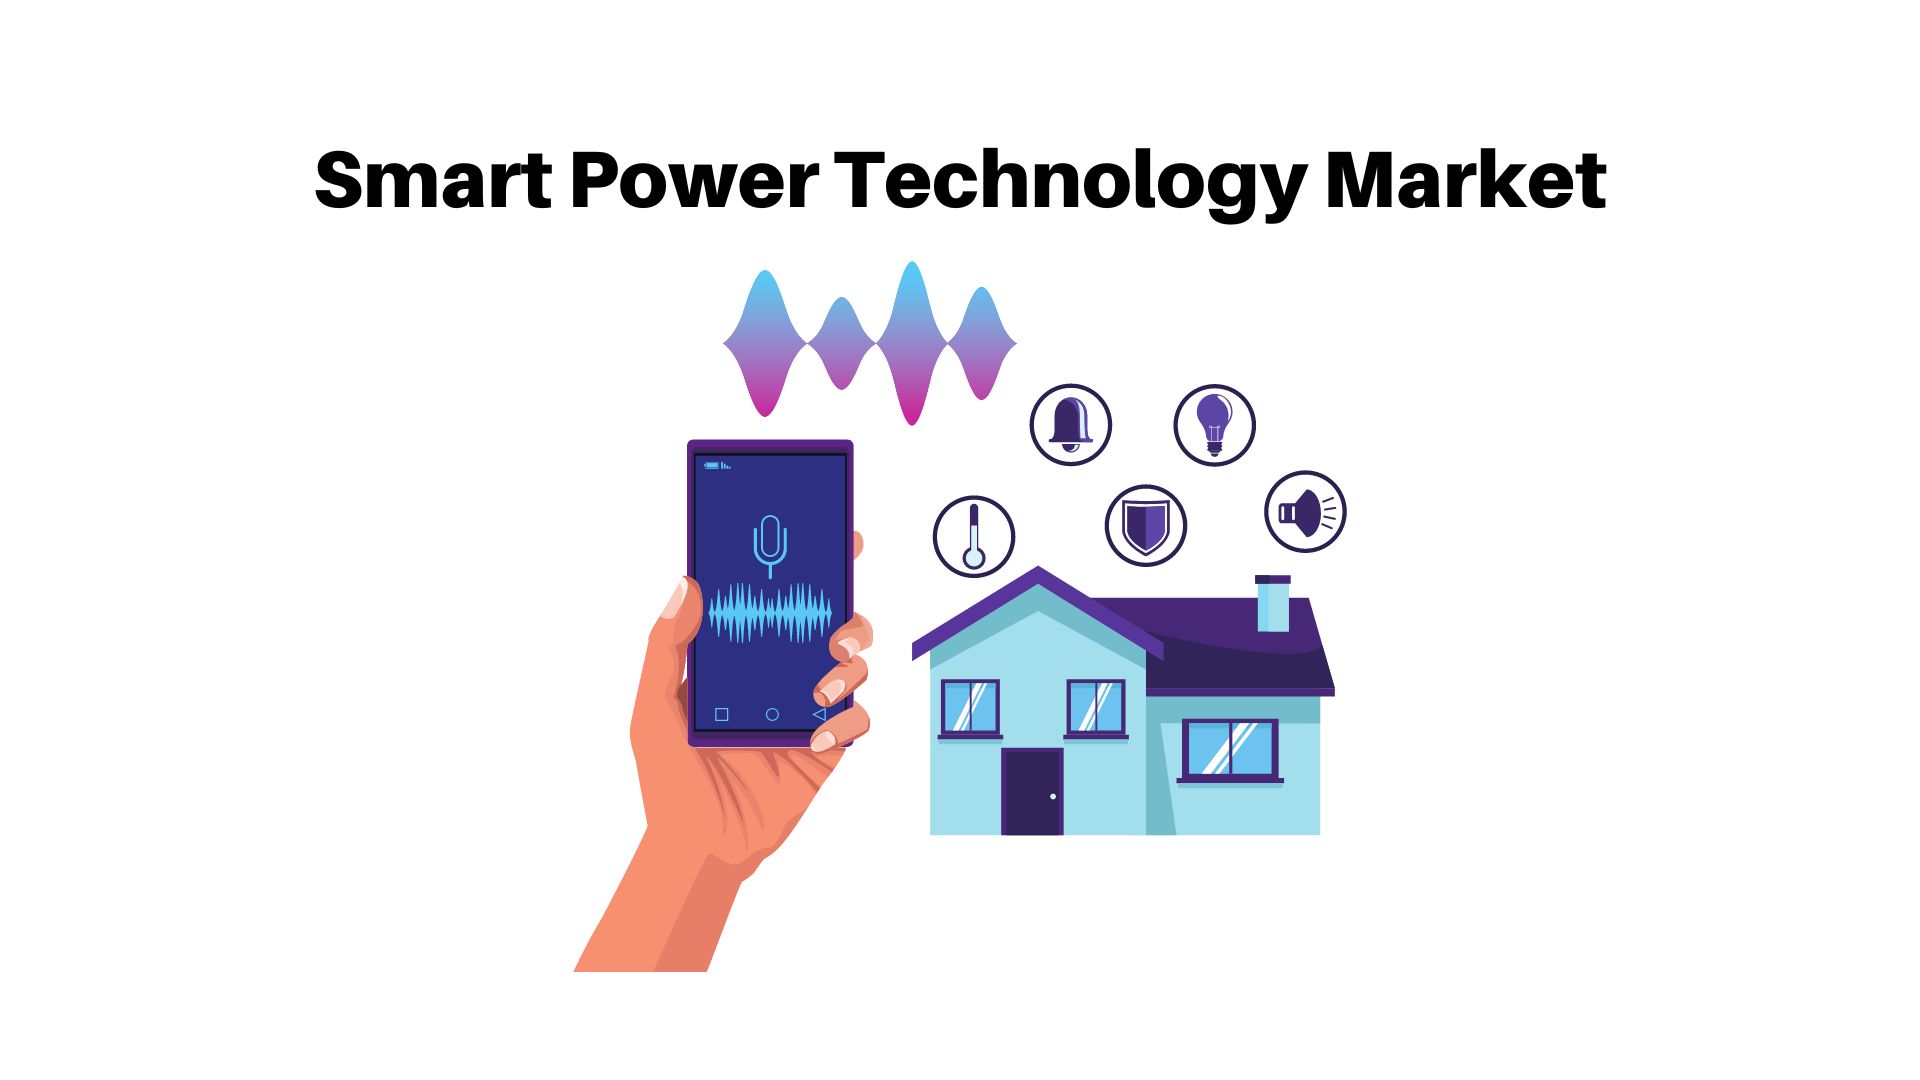 Smart Power Technology Market Will Worth USD 535.89 Bn by 2033 | CAGR of 12.7%